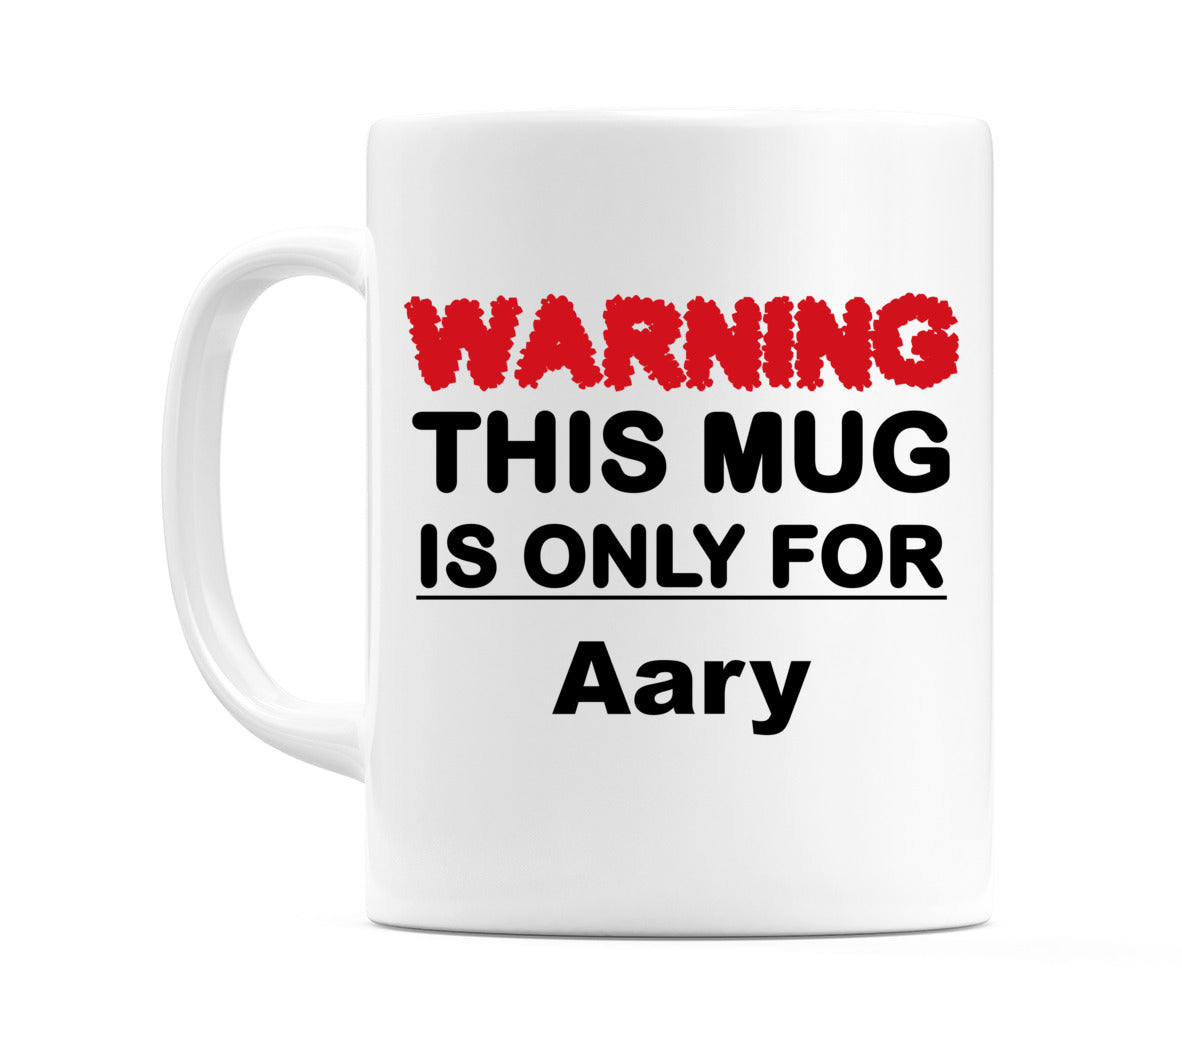 Warning This Mug is ONLY for Aary Mug